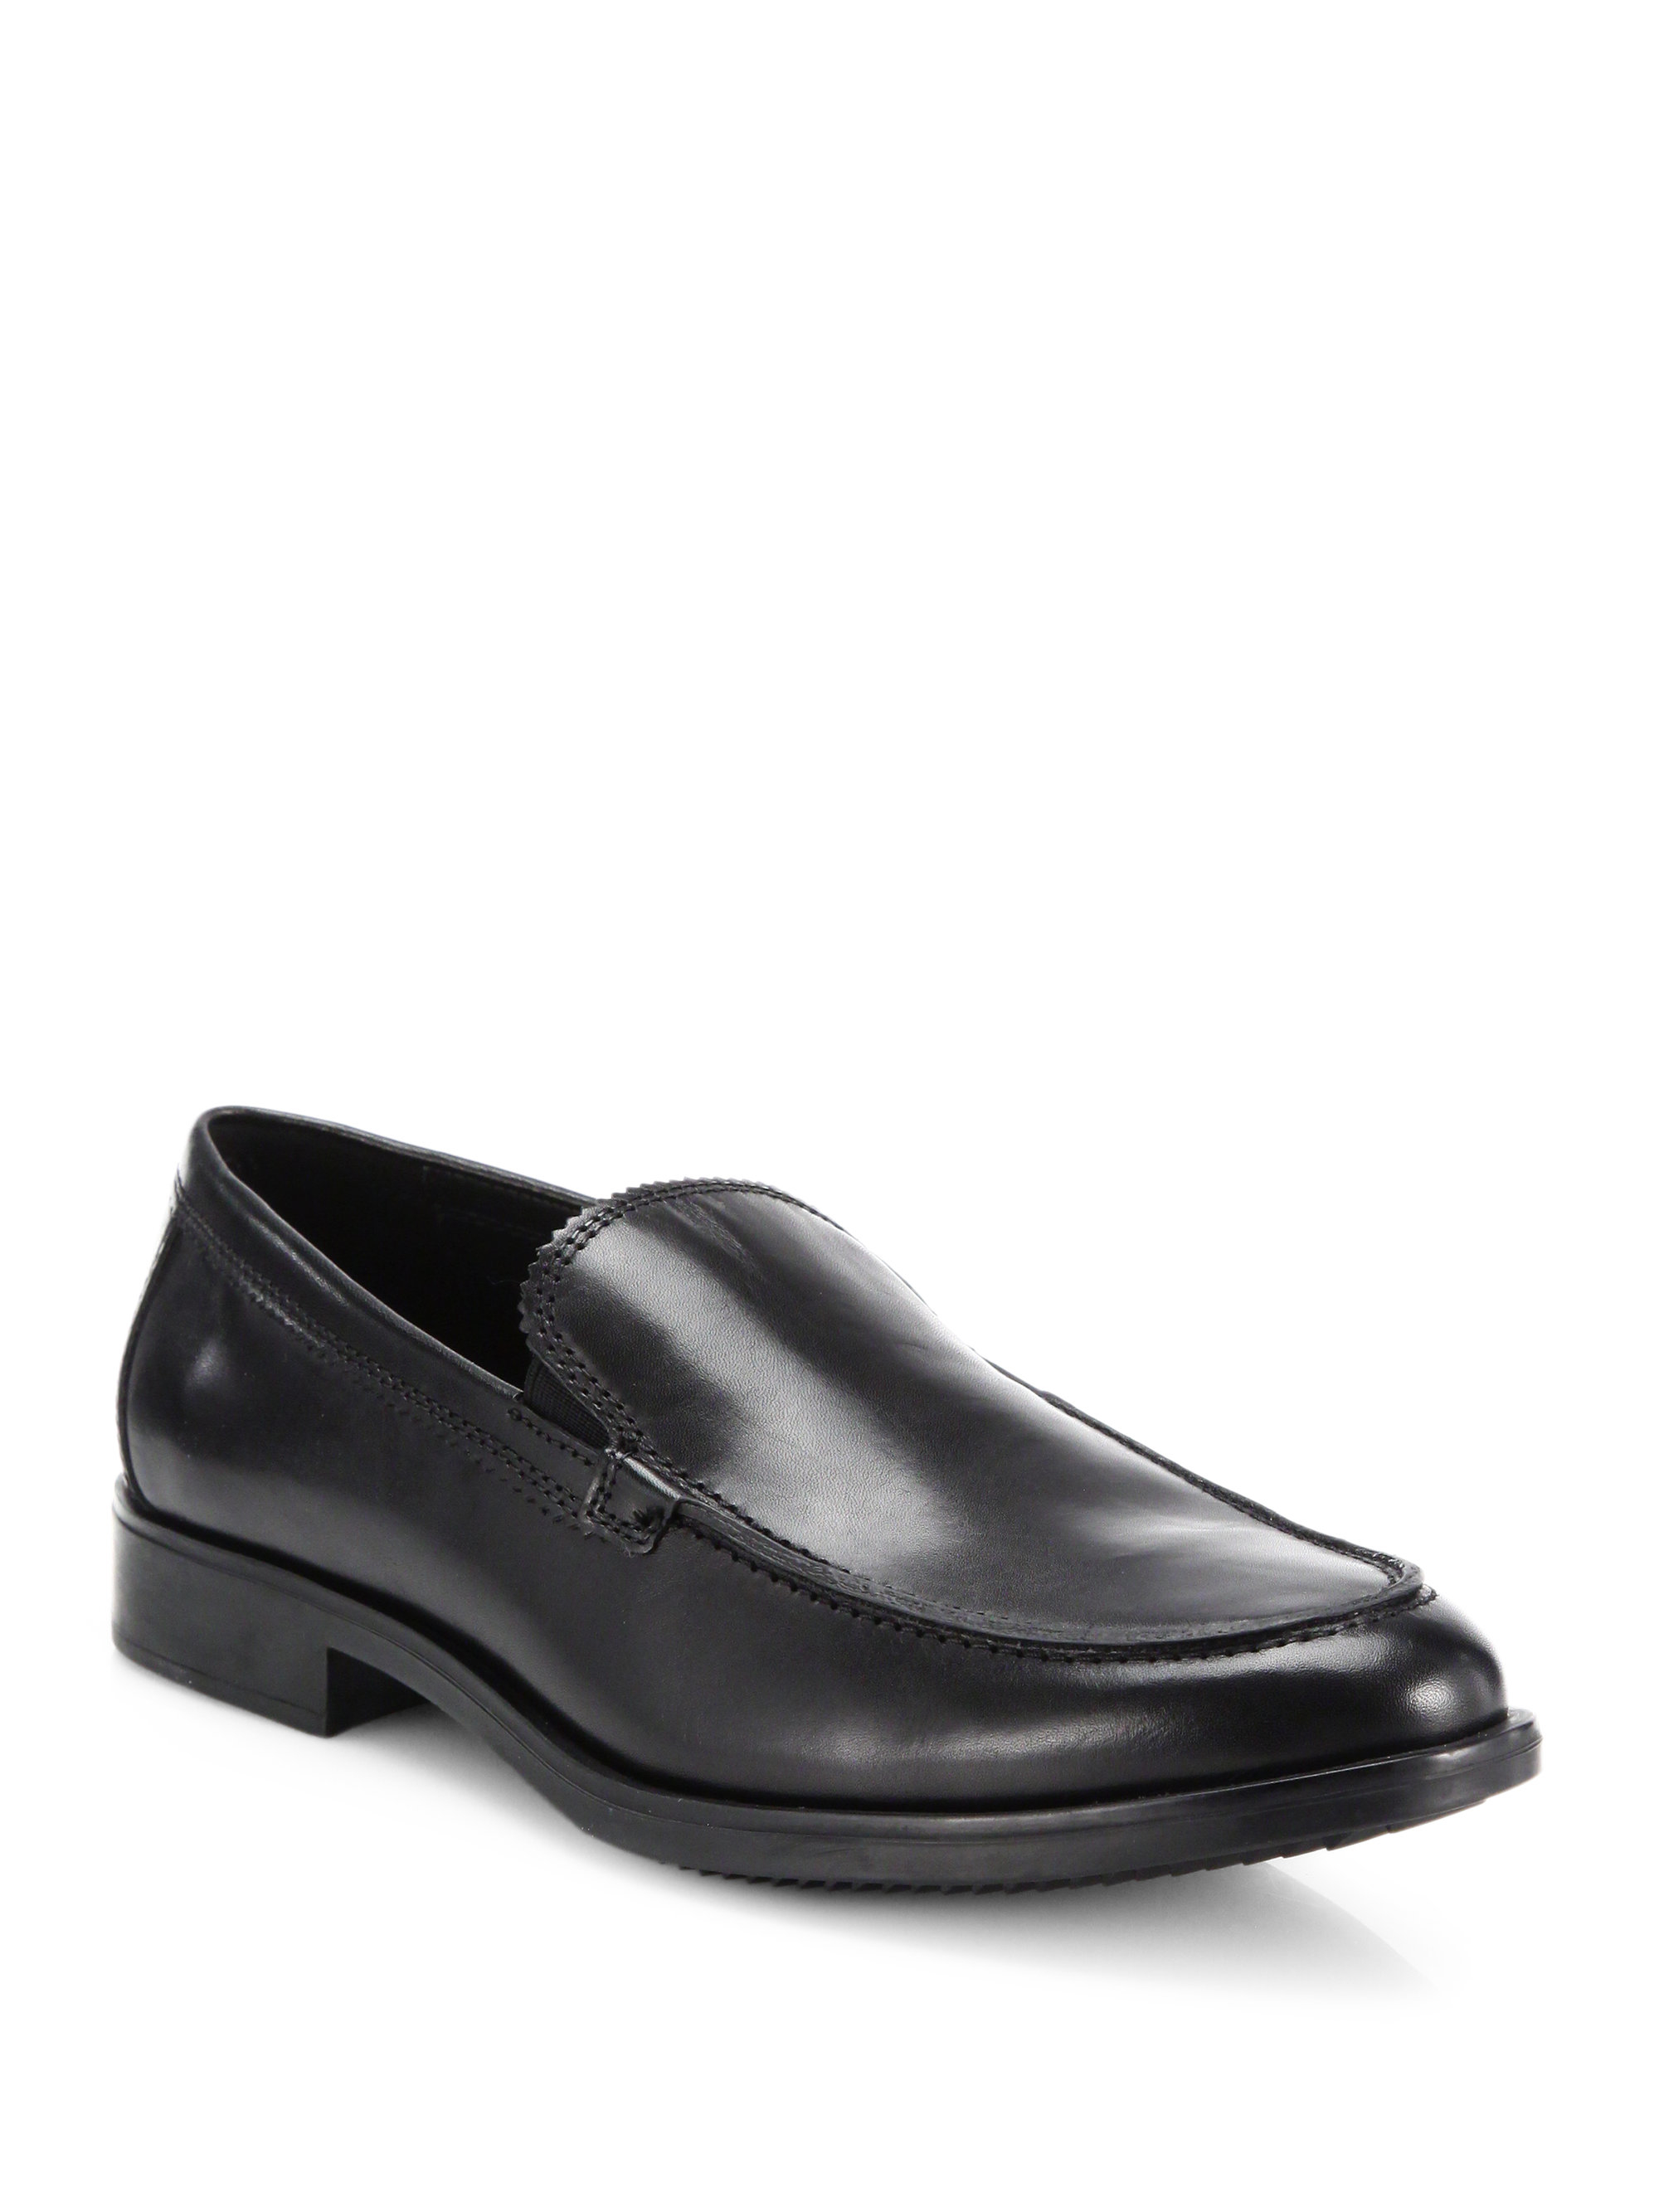 COACH Claremont Leather Venetian Loafers in Black for Men - Lyst